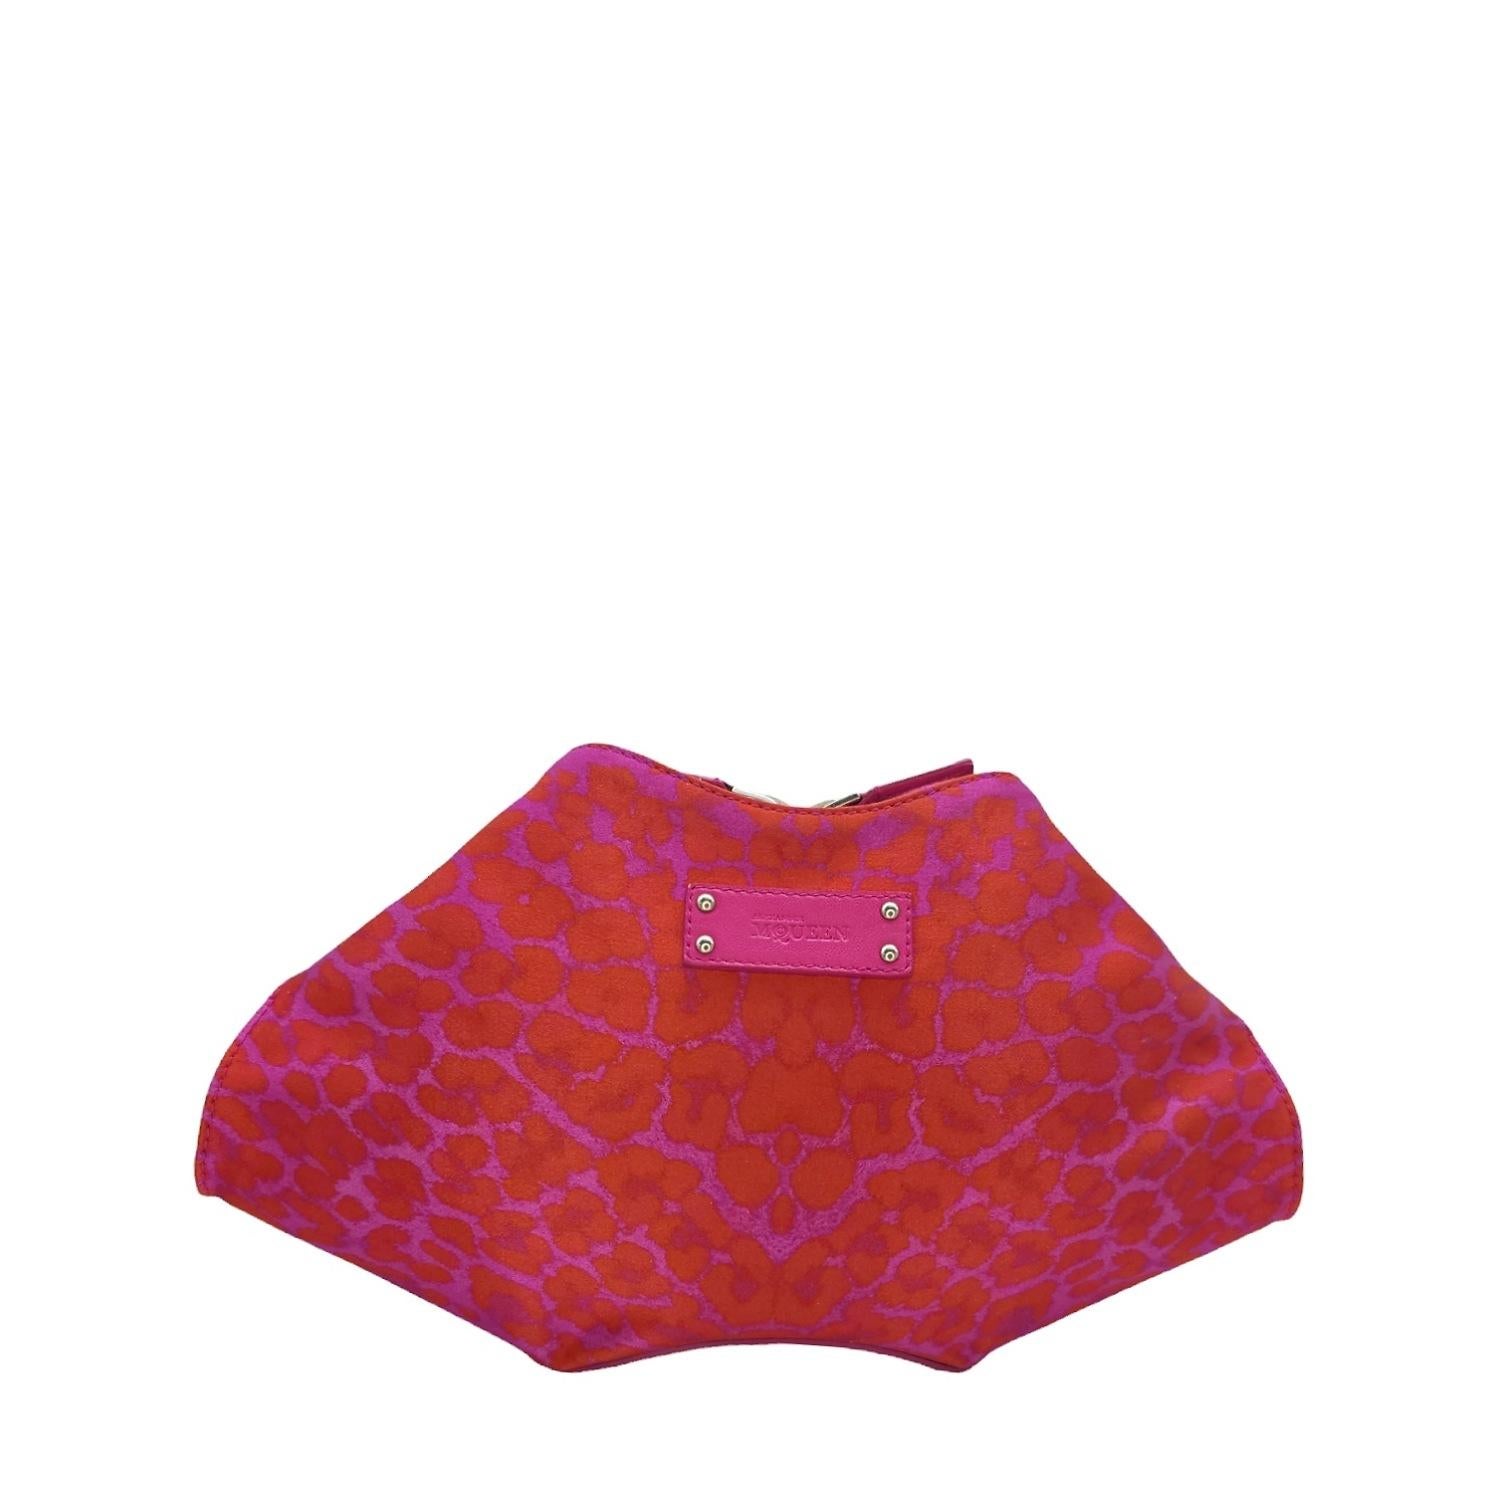 Express yourself in style with the Alexander McQueen De Manta Clutch. This playful pink and red leopard printed satin clutch is perfect for the bold and fashion-forward. With a roomy main compartment and interior zip pocket, it's perfect for